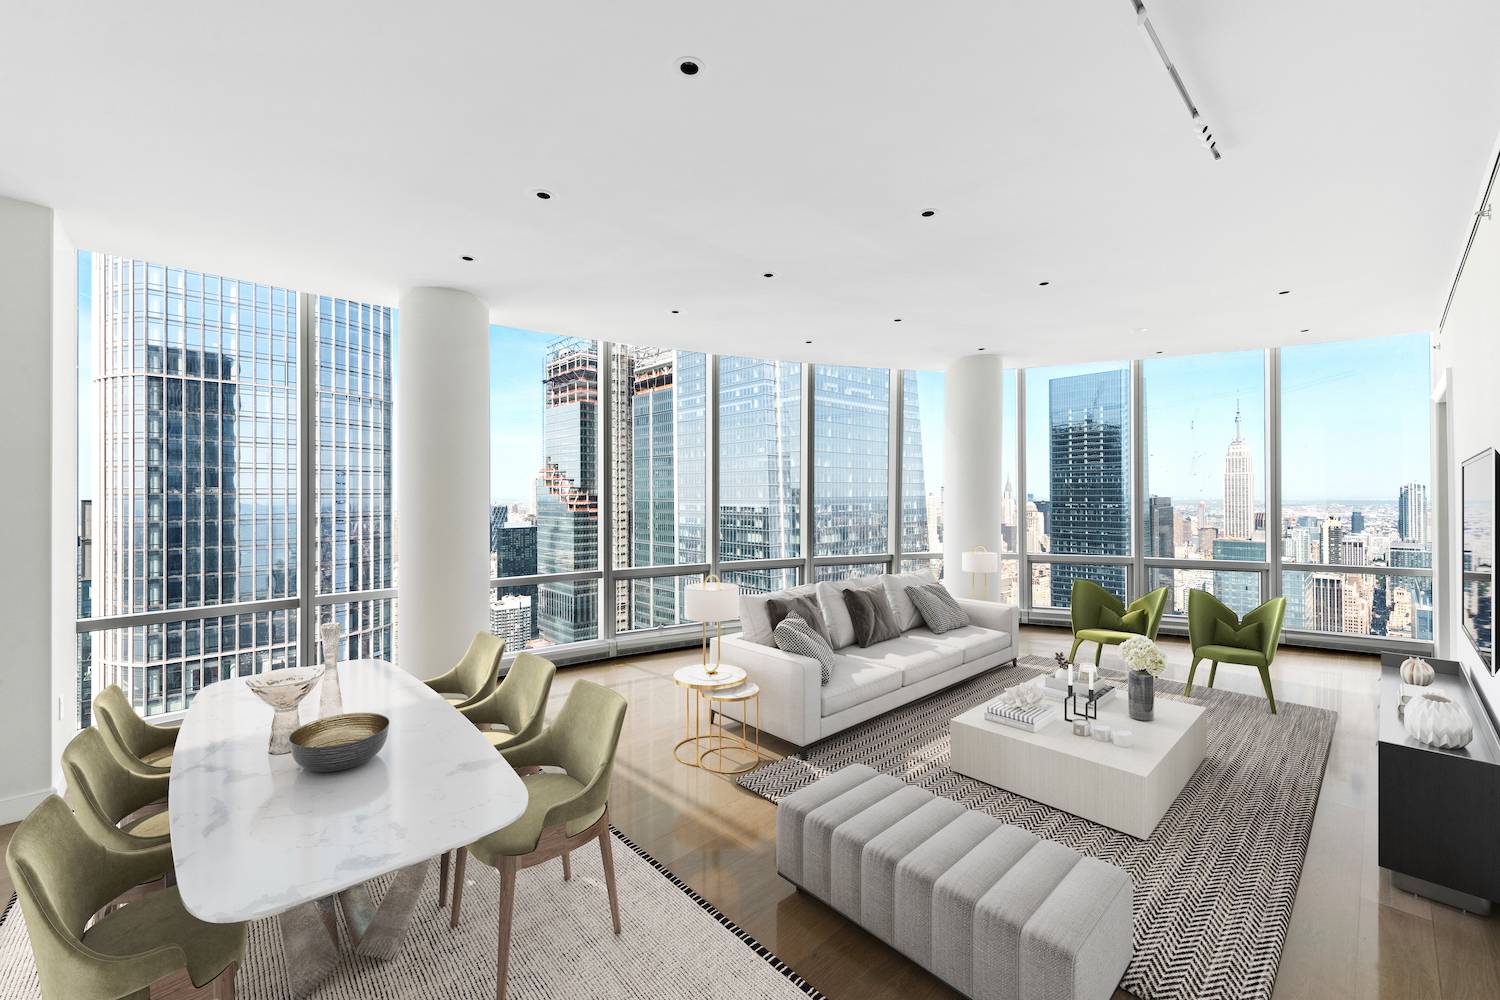 Welcome to this sublime skyline penthouse nestled in the ultra luxurious Hudson Yards neighborhood, a stunning 3 bedroom, 3.